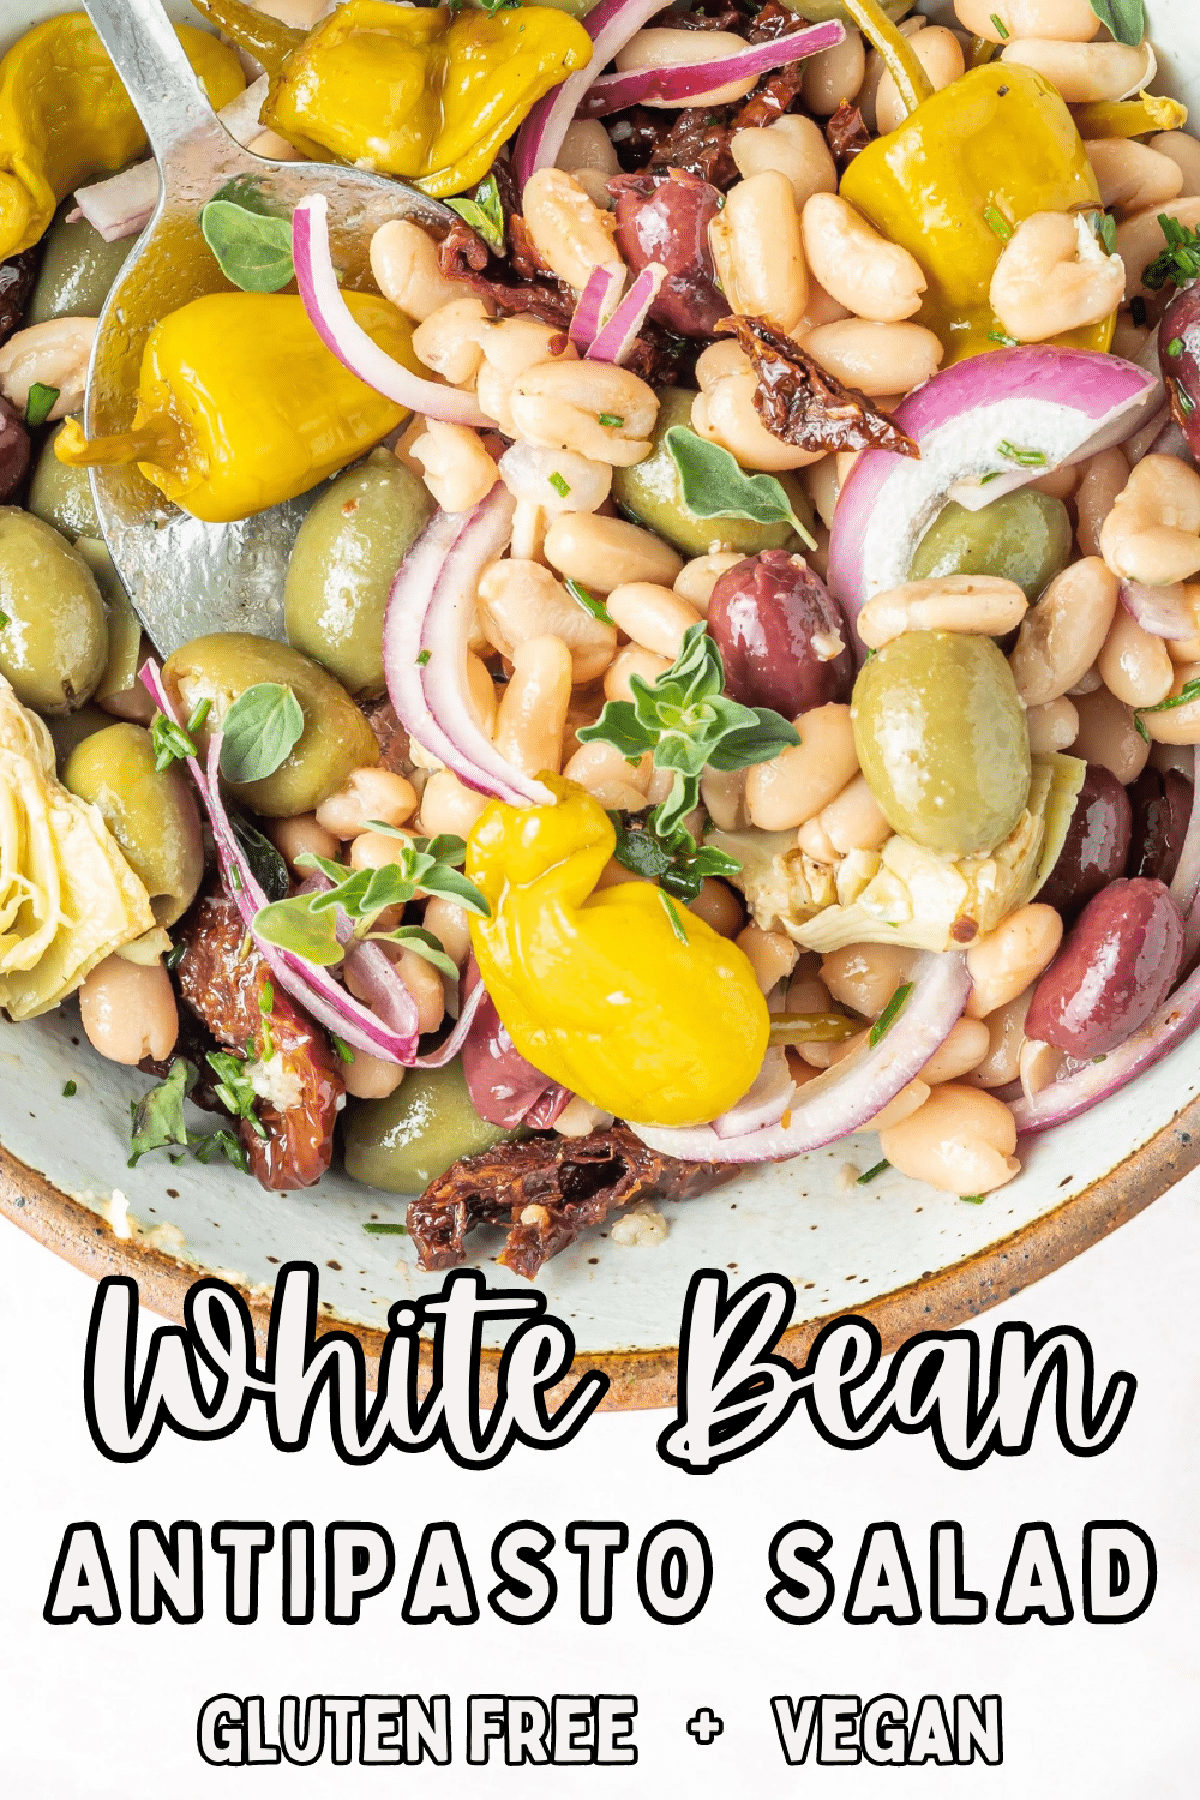 Overhead view of a bowl of antiopasto bean salad, which includes black kalamata and green castelvetrano olives, white beans, sun dried tomatoes, sliced artichoke hearts, sliced red onion, pepperoncini peppers, herbs and spices.